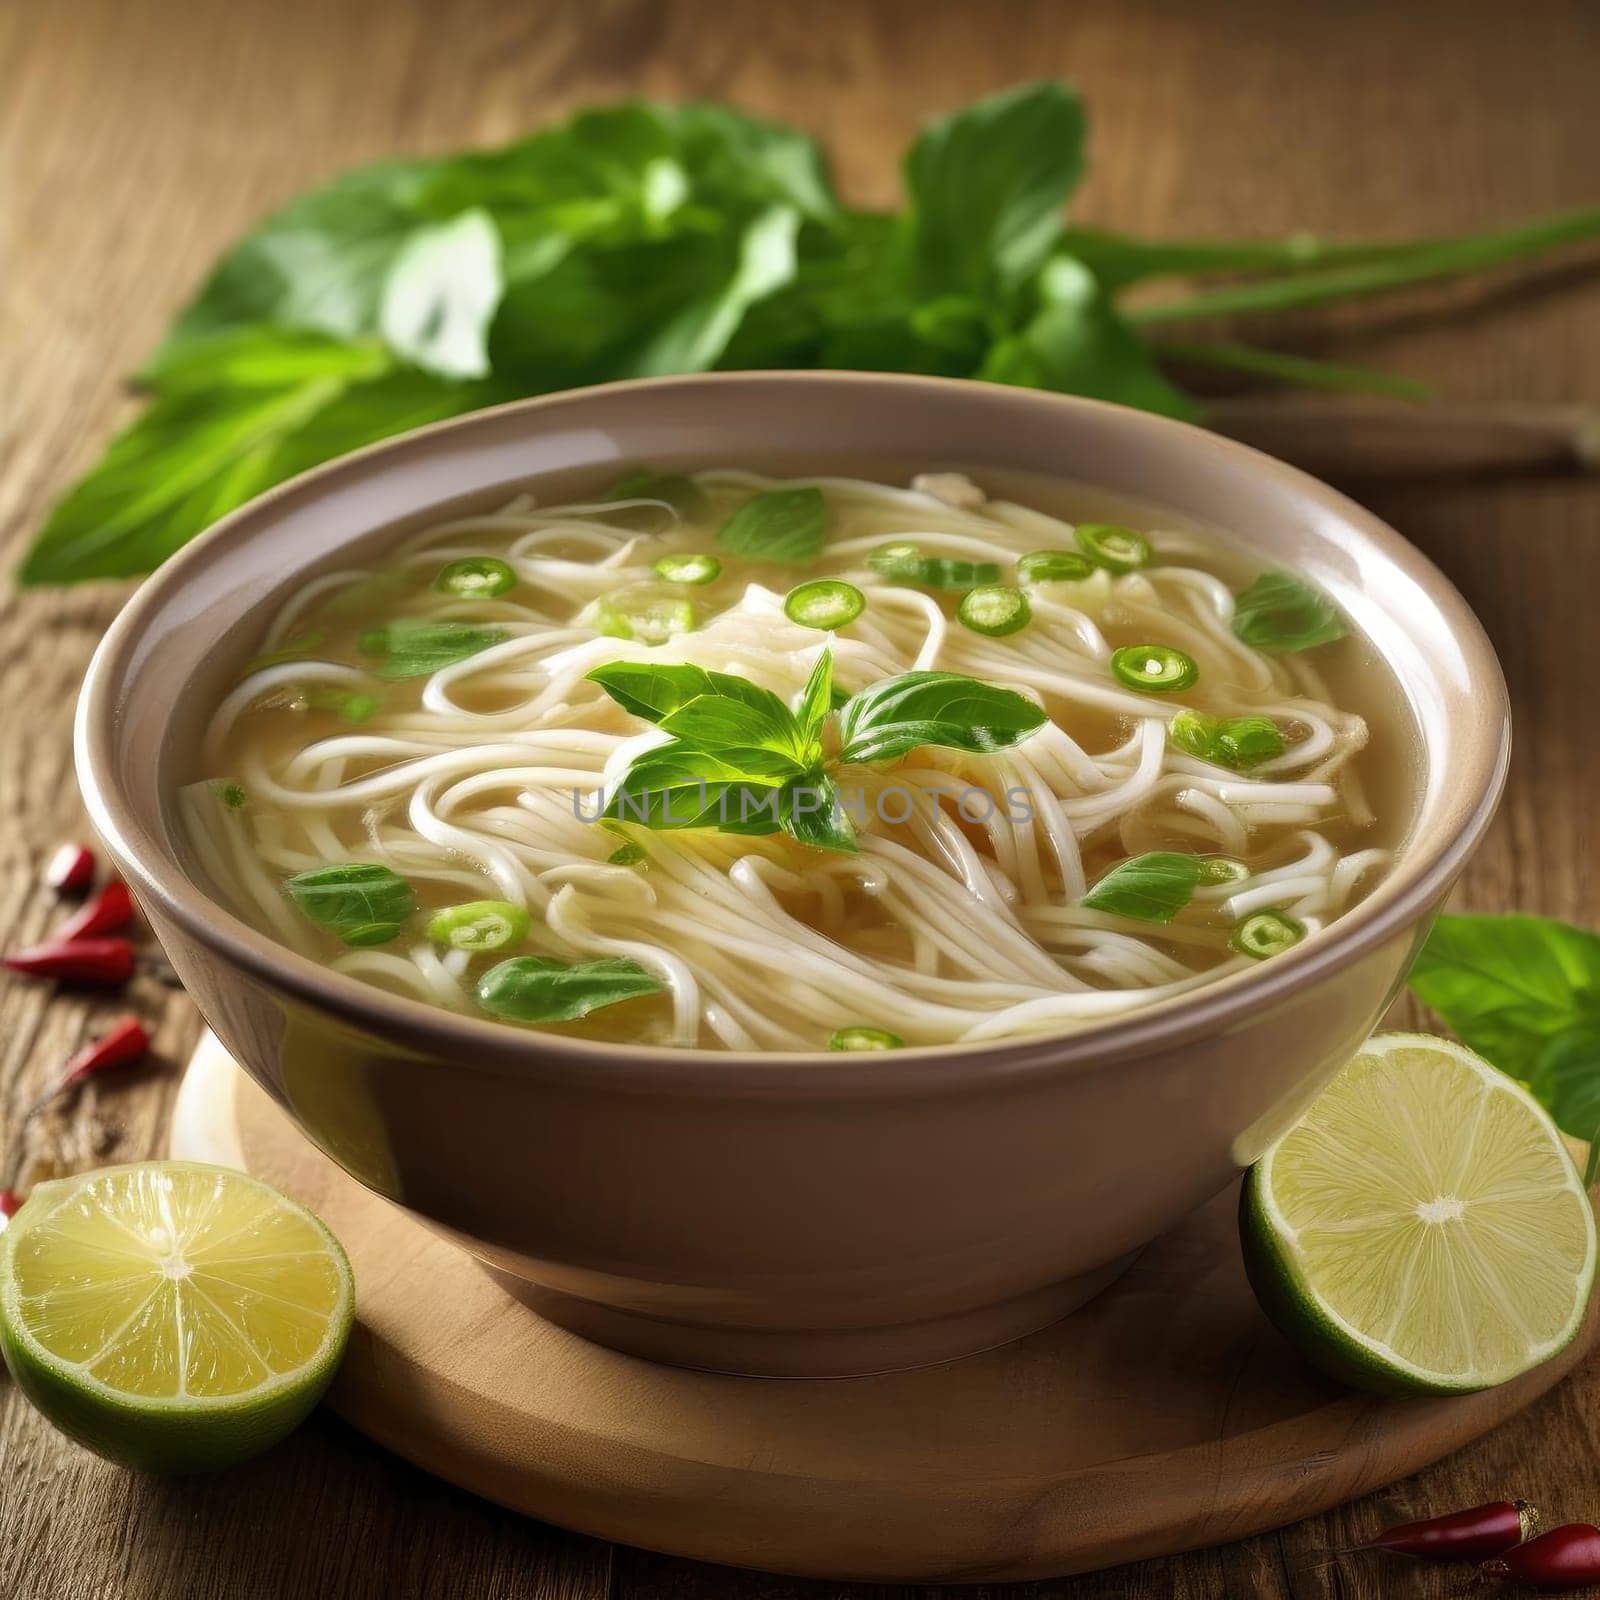 Vietnamese soup with noodles and vegetables in bowl on wooden table (ID: 001412)